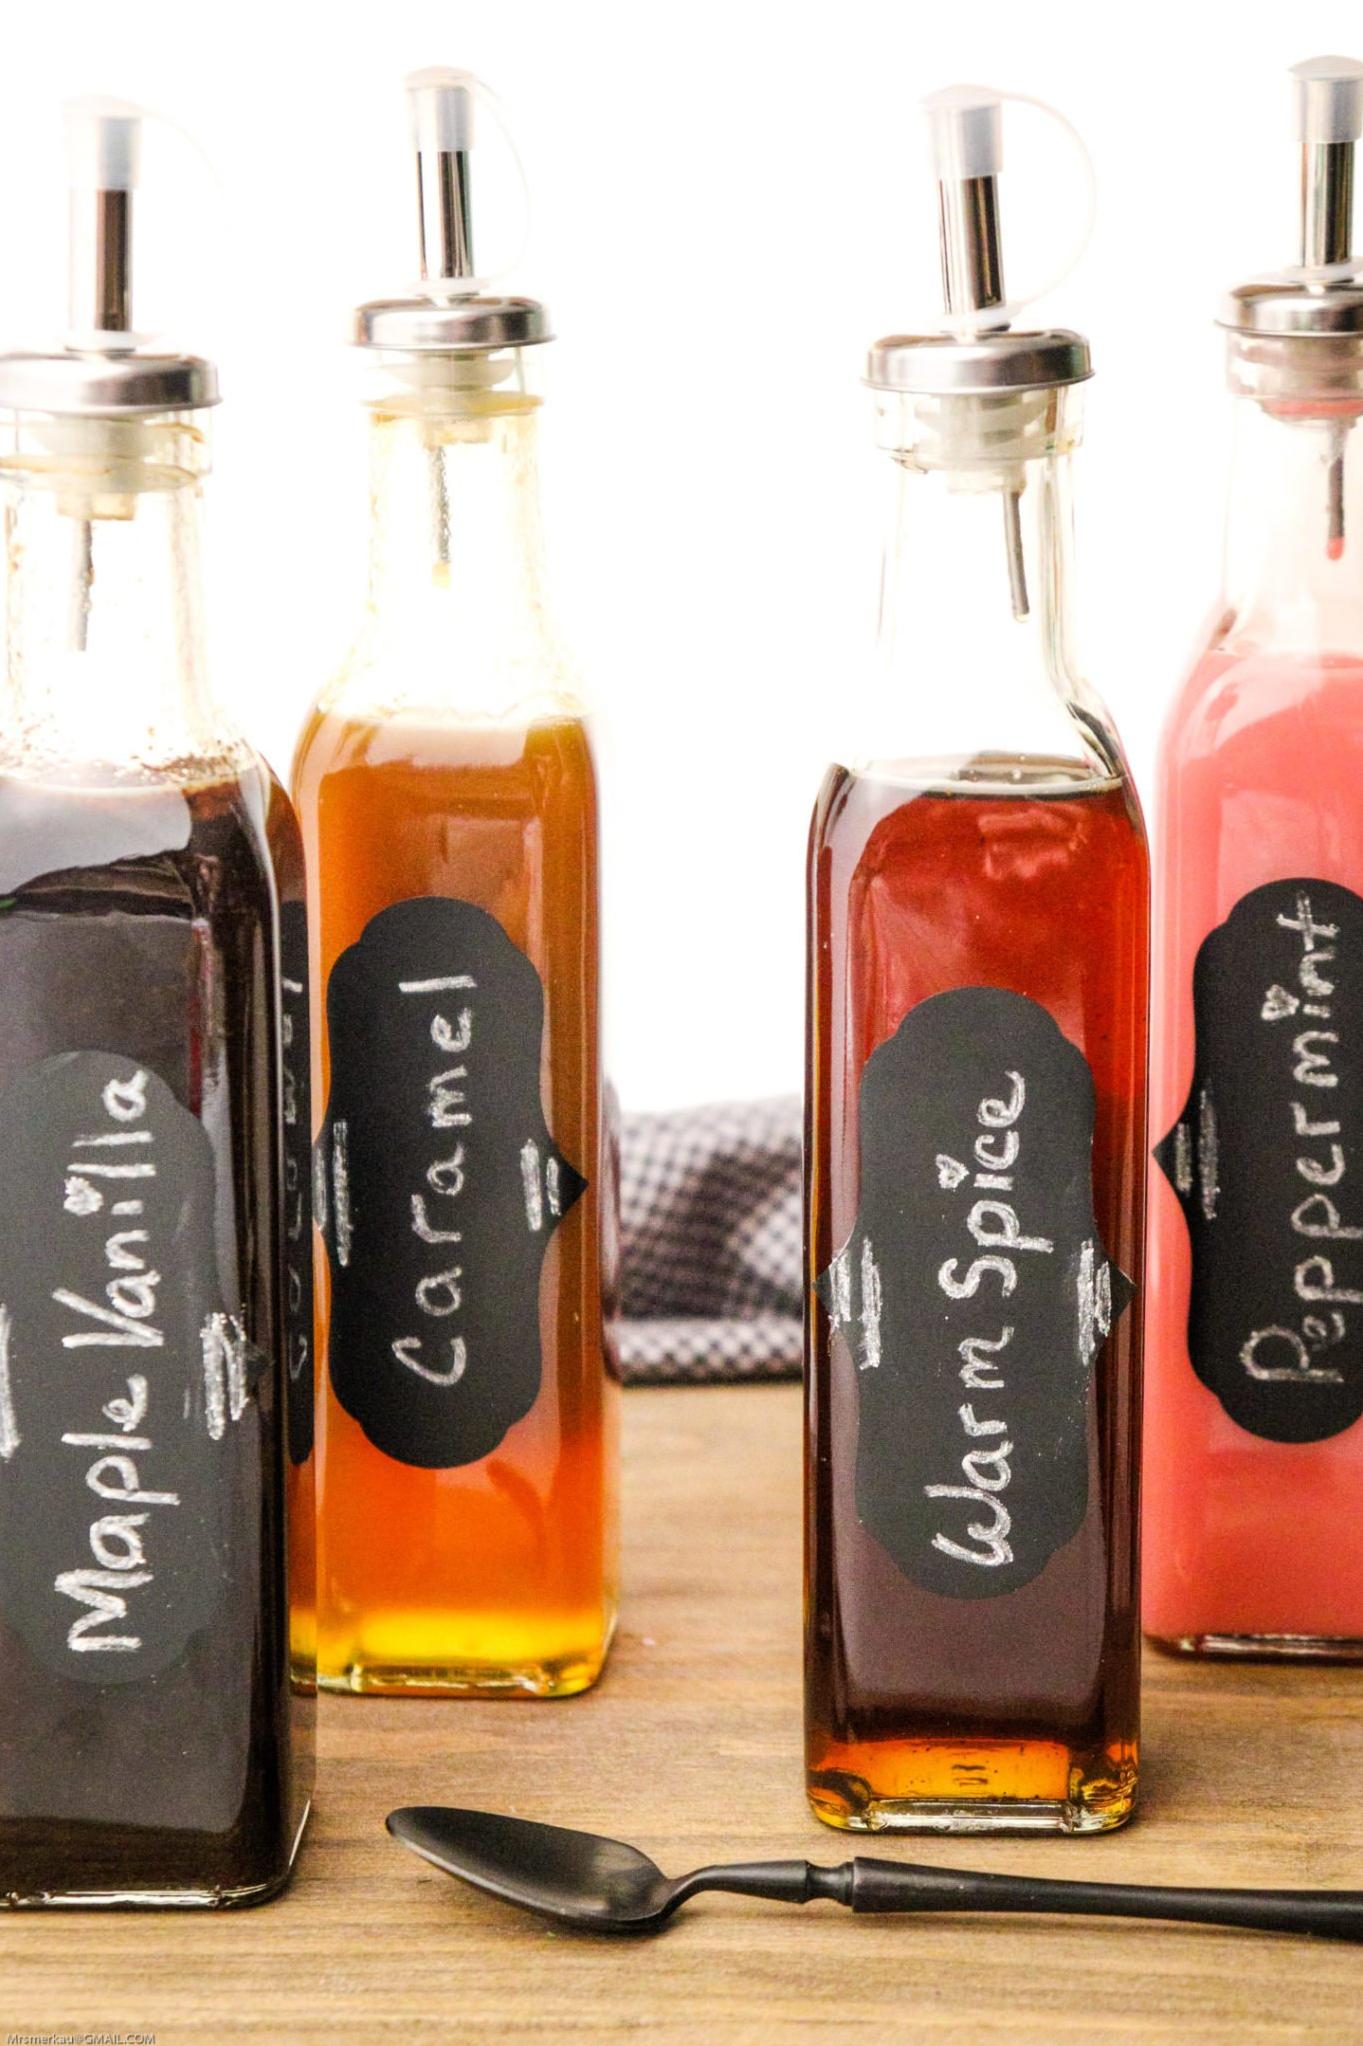  Customize your coffee just the way you like it with homemade syrup.